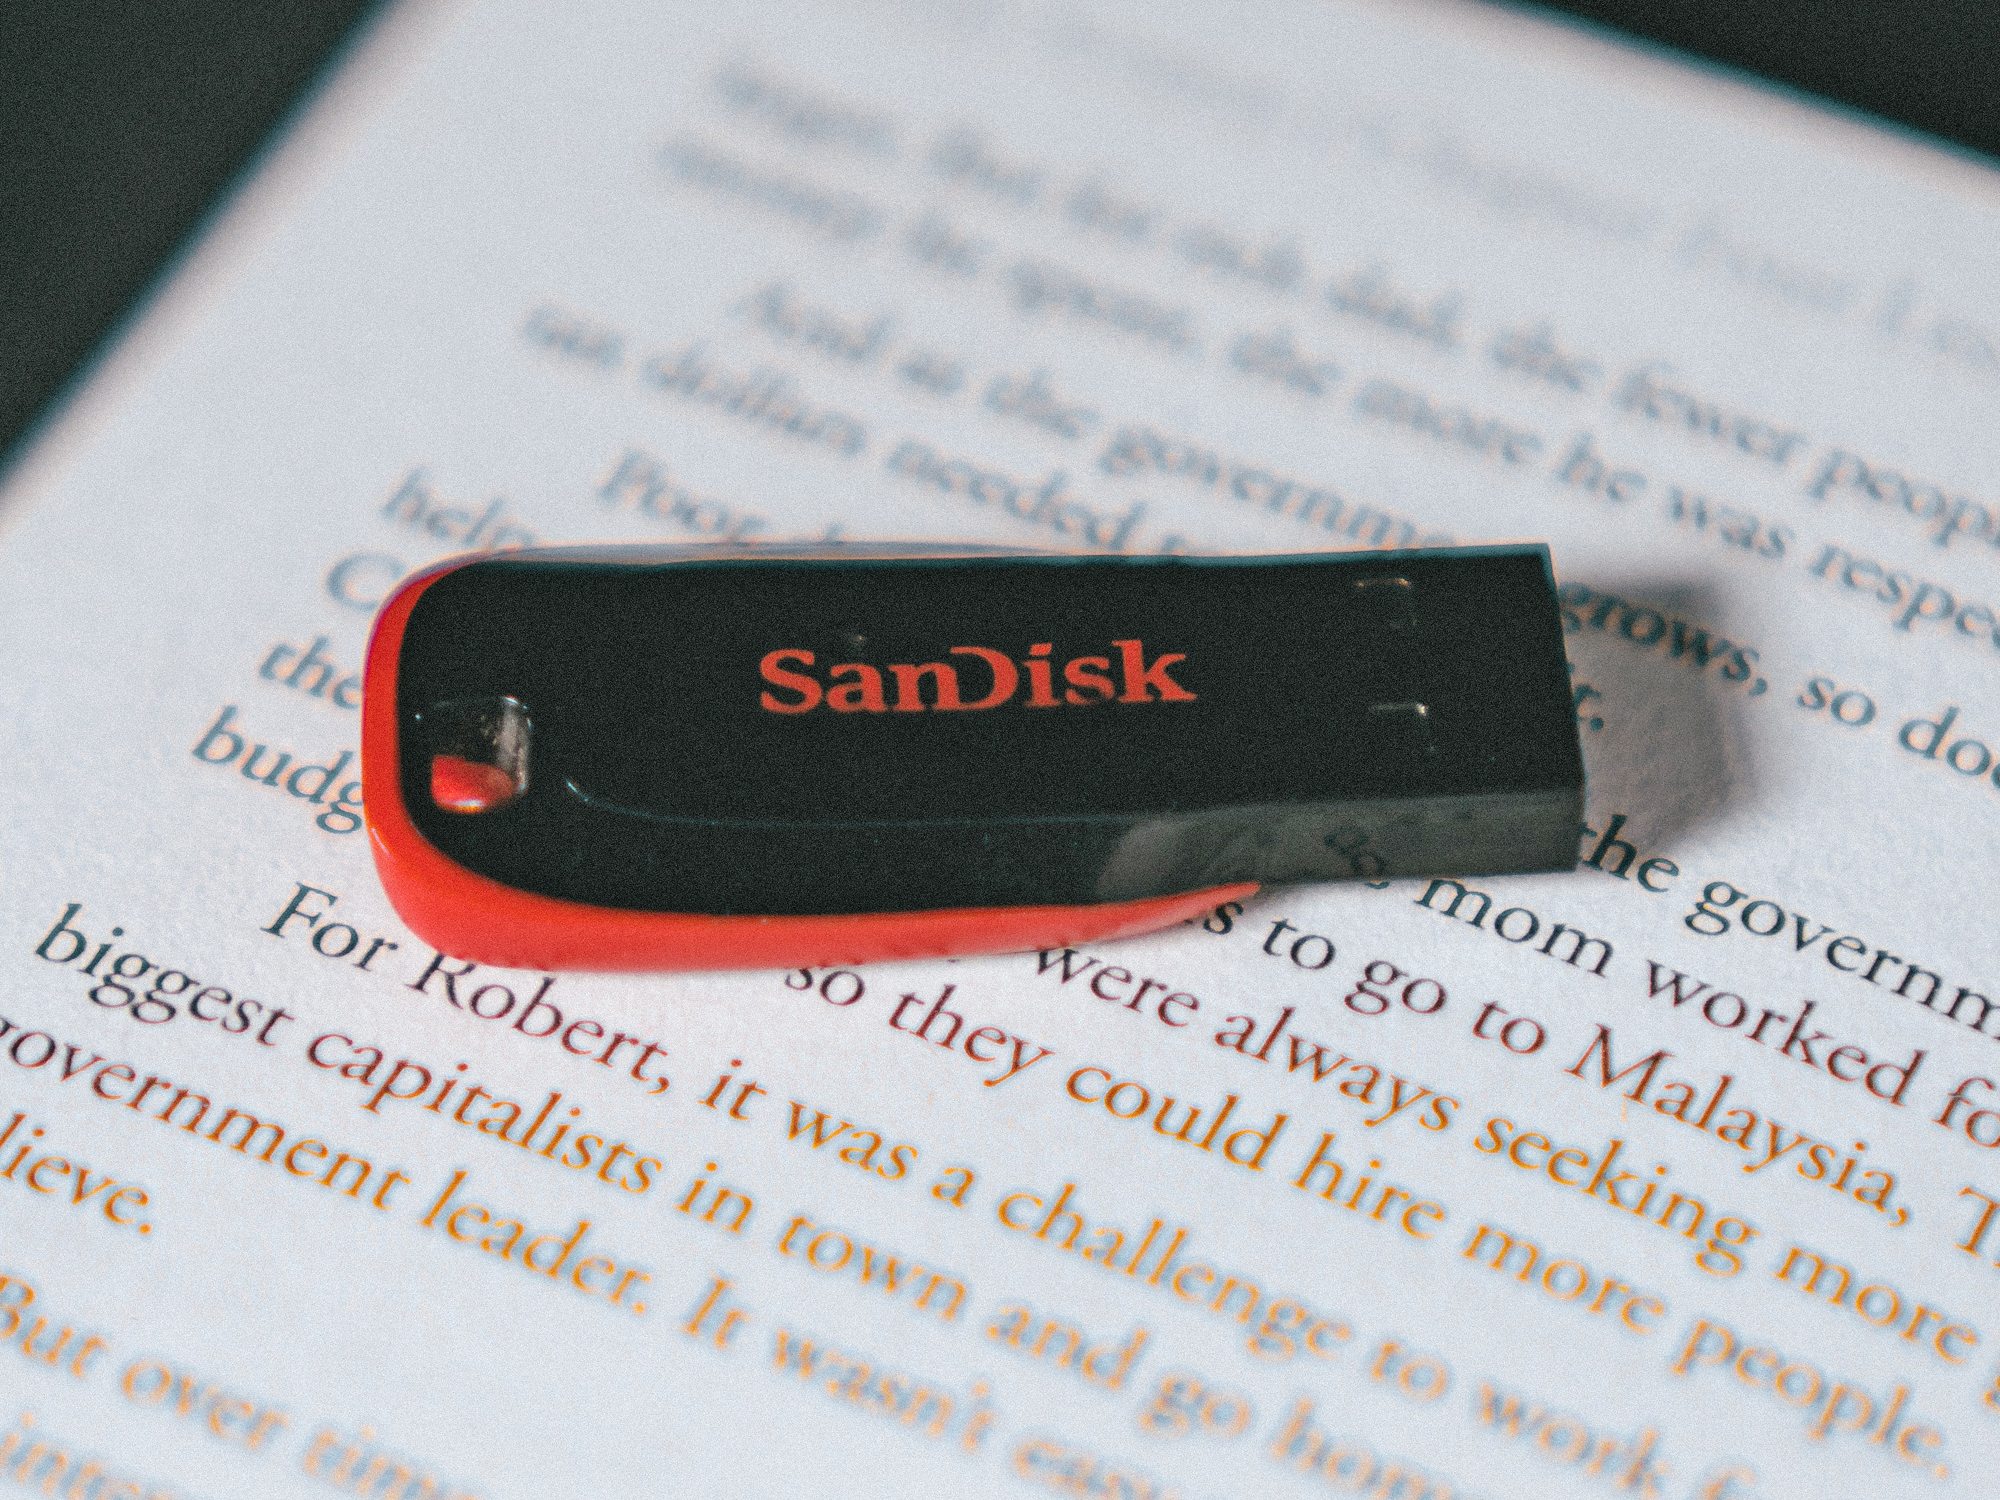 endnu engang rørledning Kollegium What to do with an old USB drive | Popular Science